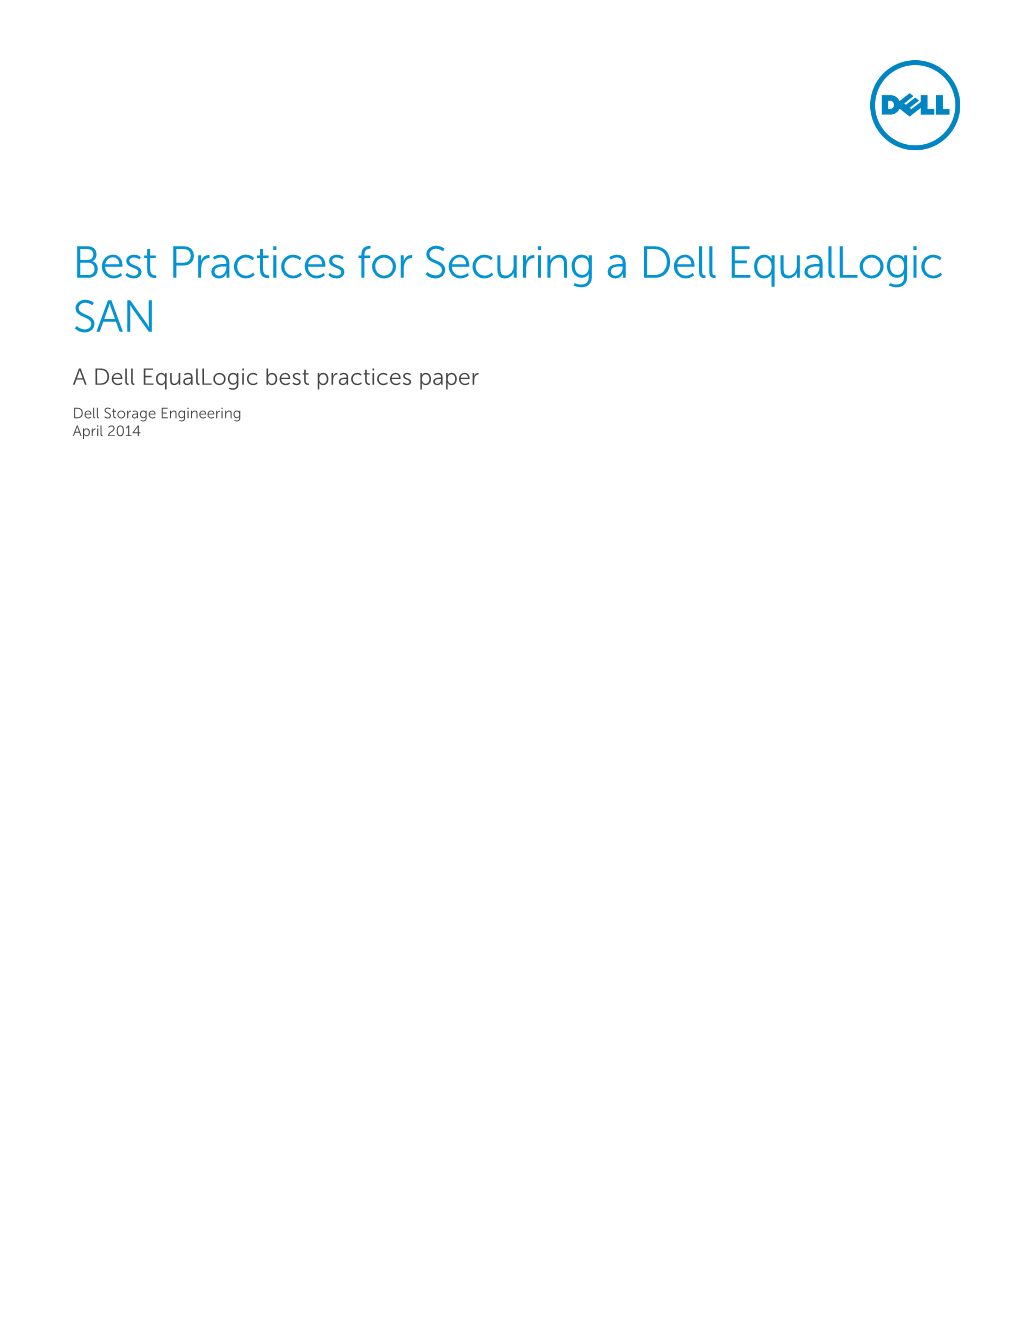 Best Practices for Securing a Dell Equallogic SAN